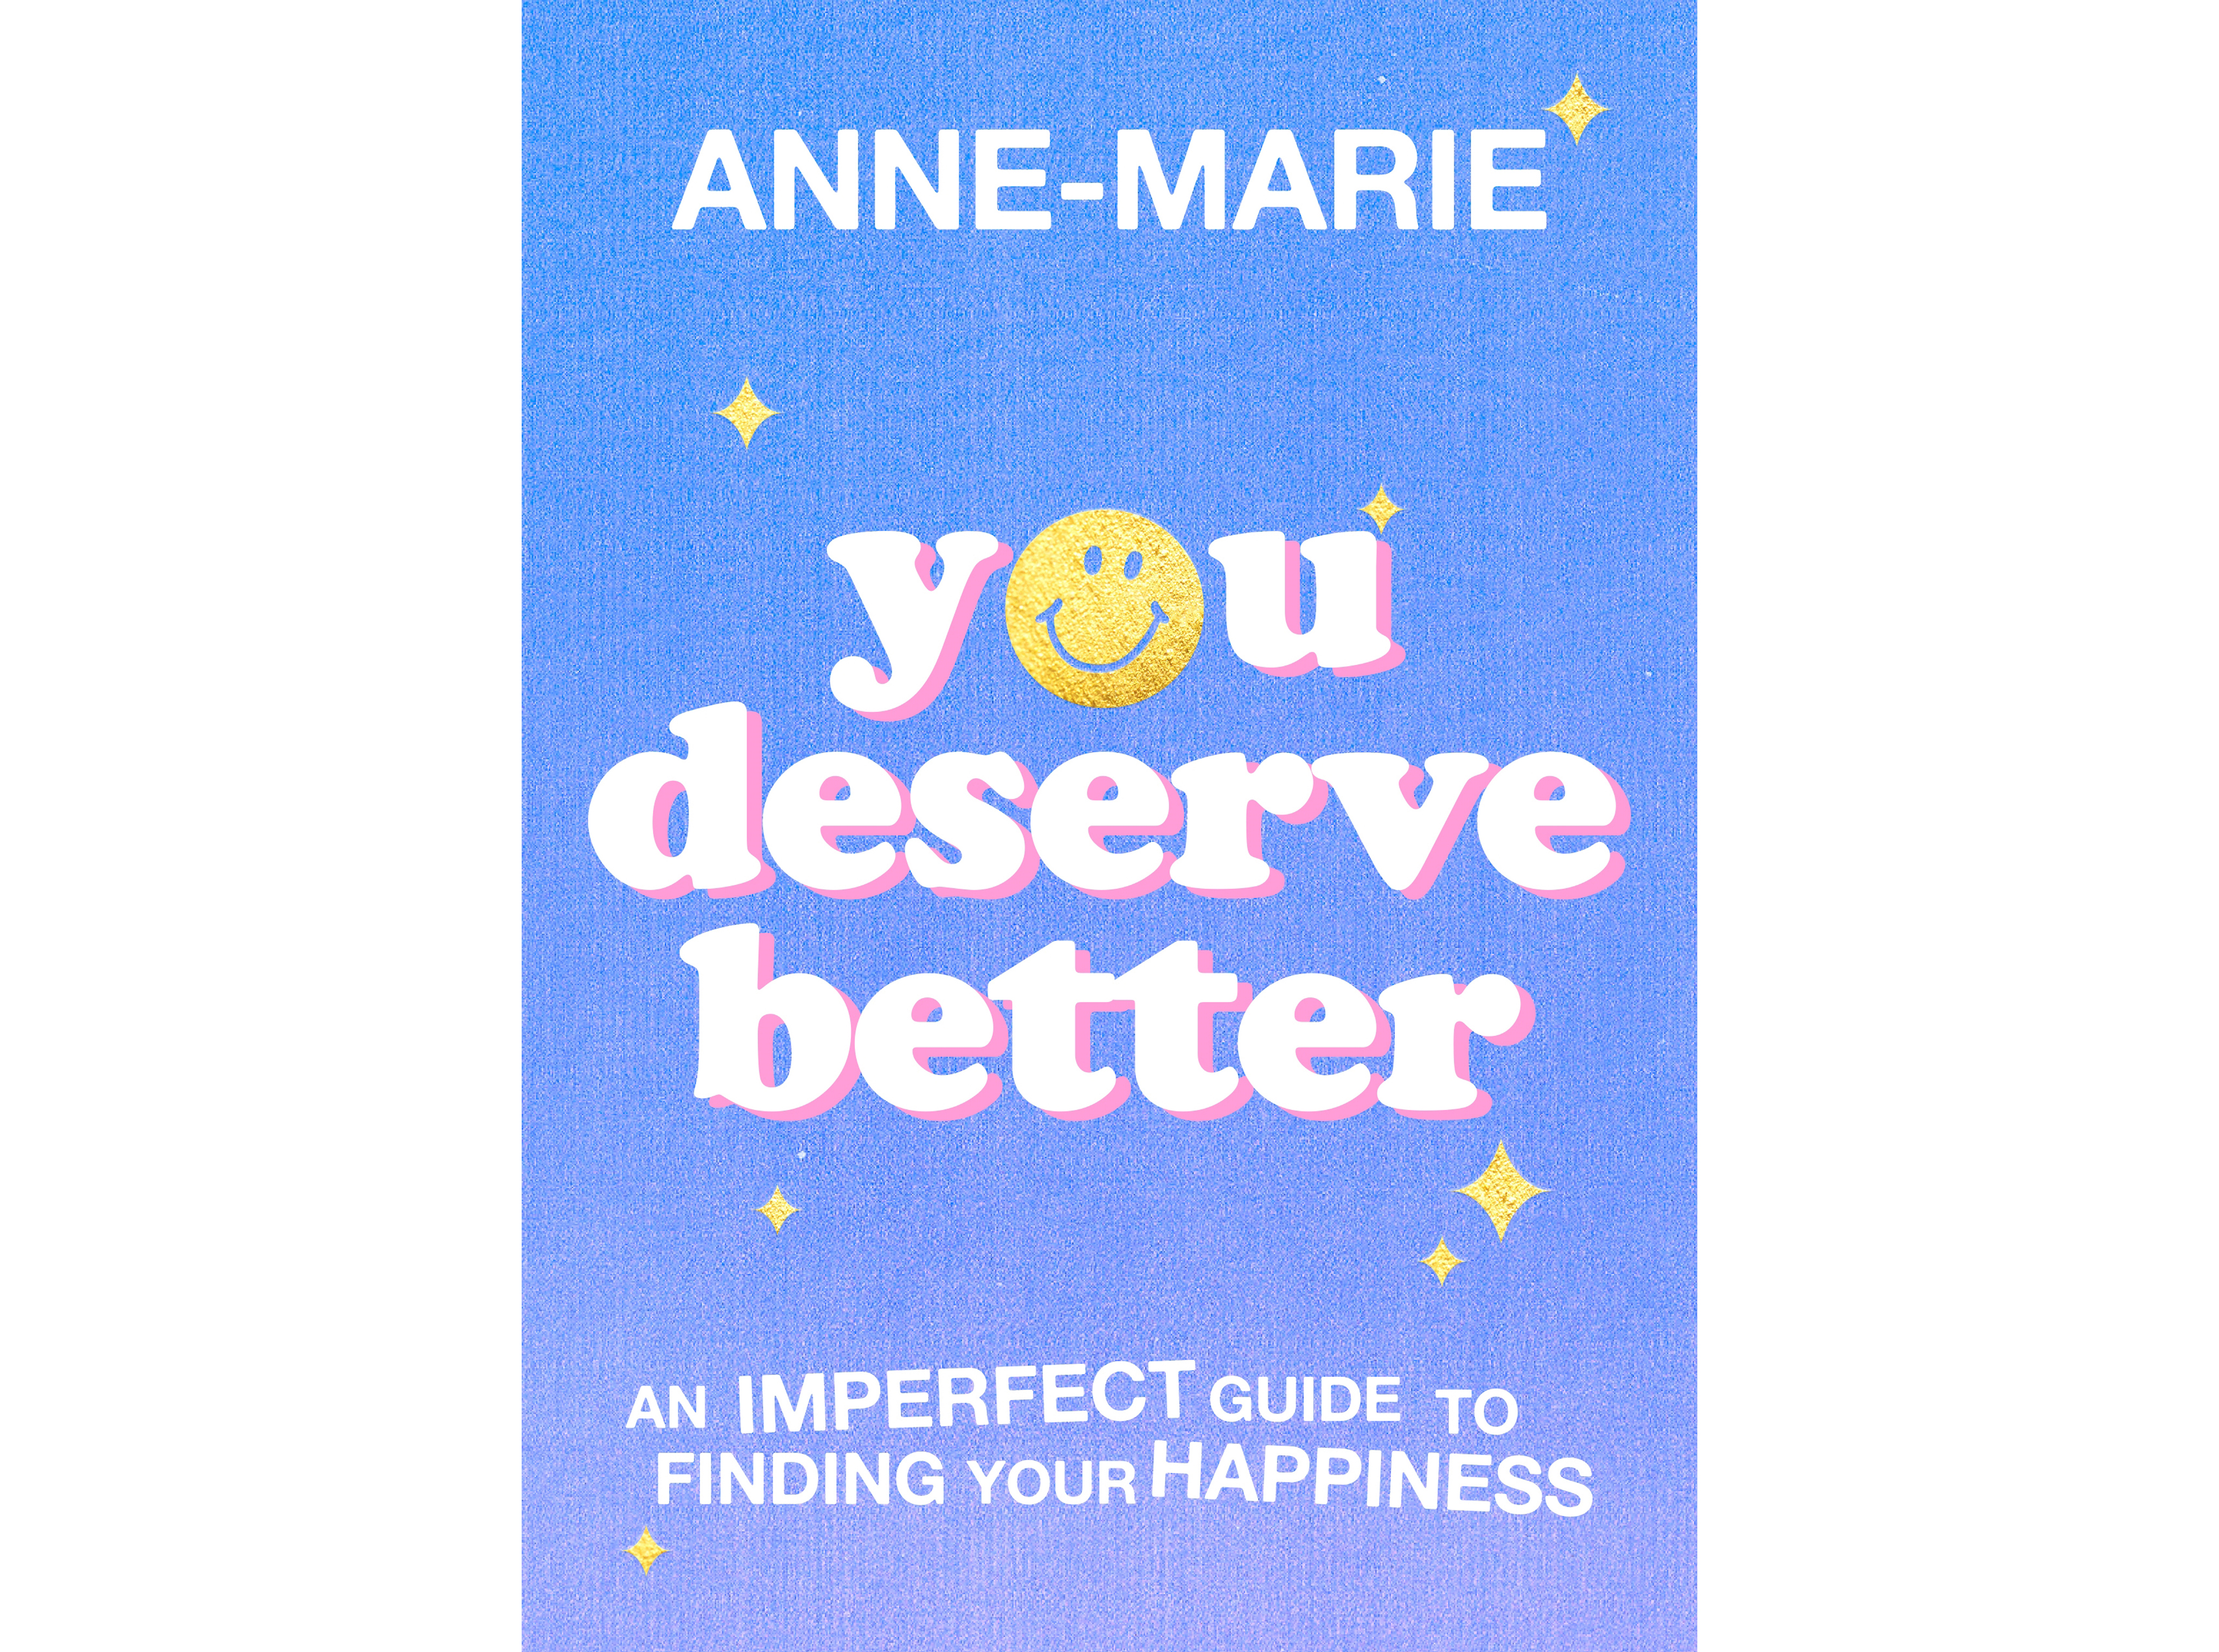 You deserve better, by anne-marie